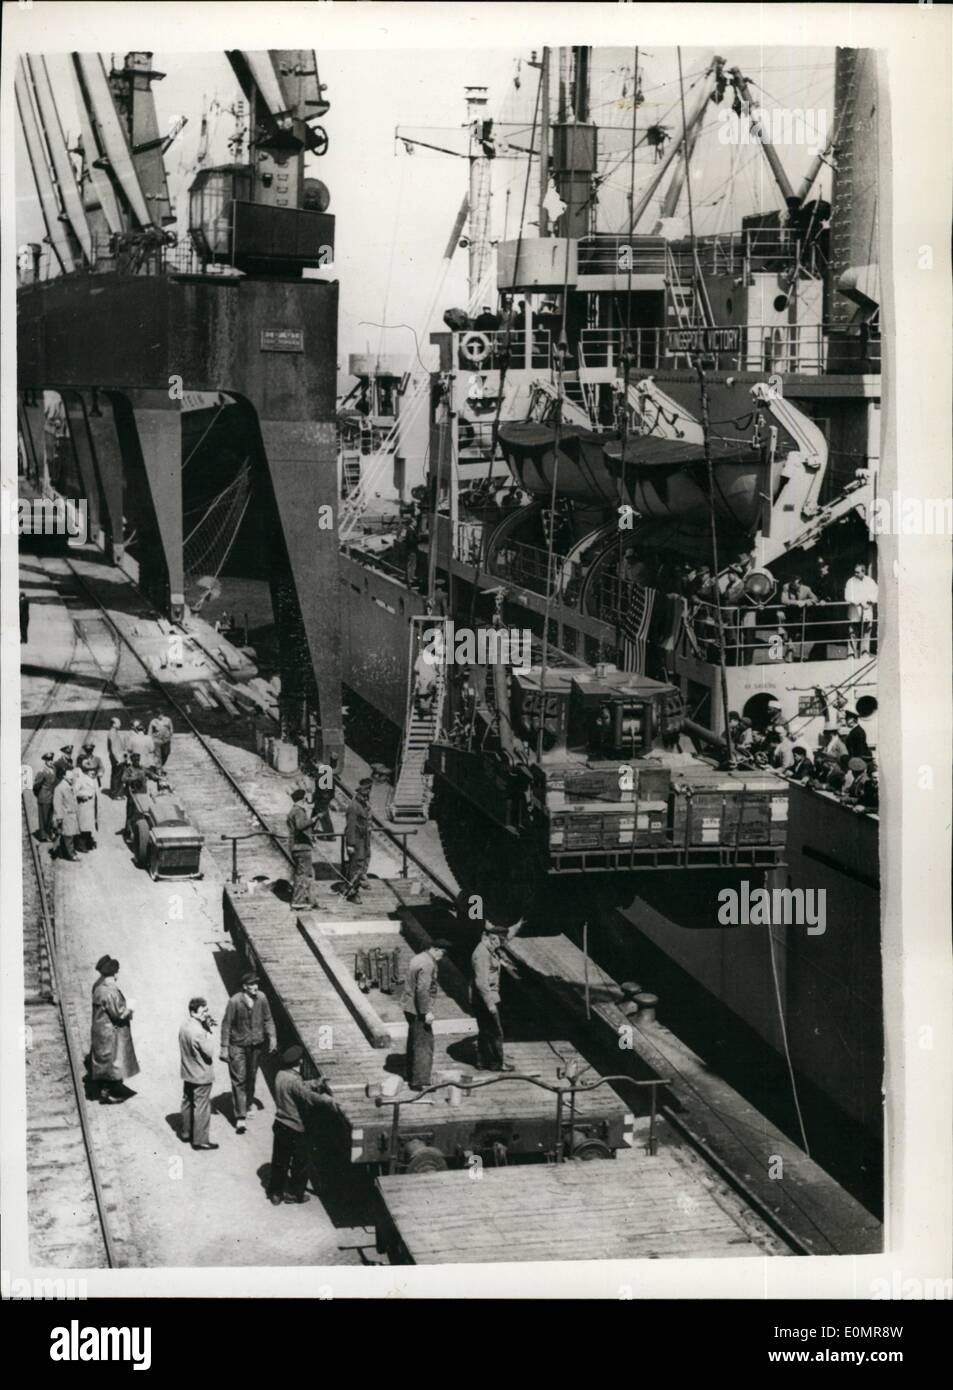 May 05, 1956 - First shipment of arms from America.: The first shipment of heavy arms arrived at Bremerhaven from America, the main items were 23 light tanks seven self-propelled howitzers and 20 tank recovery vehicles. The unloading of the arms took place in the presence of General Heusinger and Ambassador Dowling U.S.A. Photo shows the first shipment being unloaded at Bremerhaven. Stock Photo